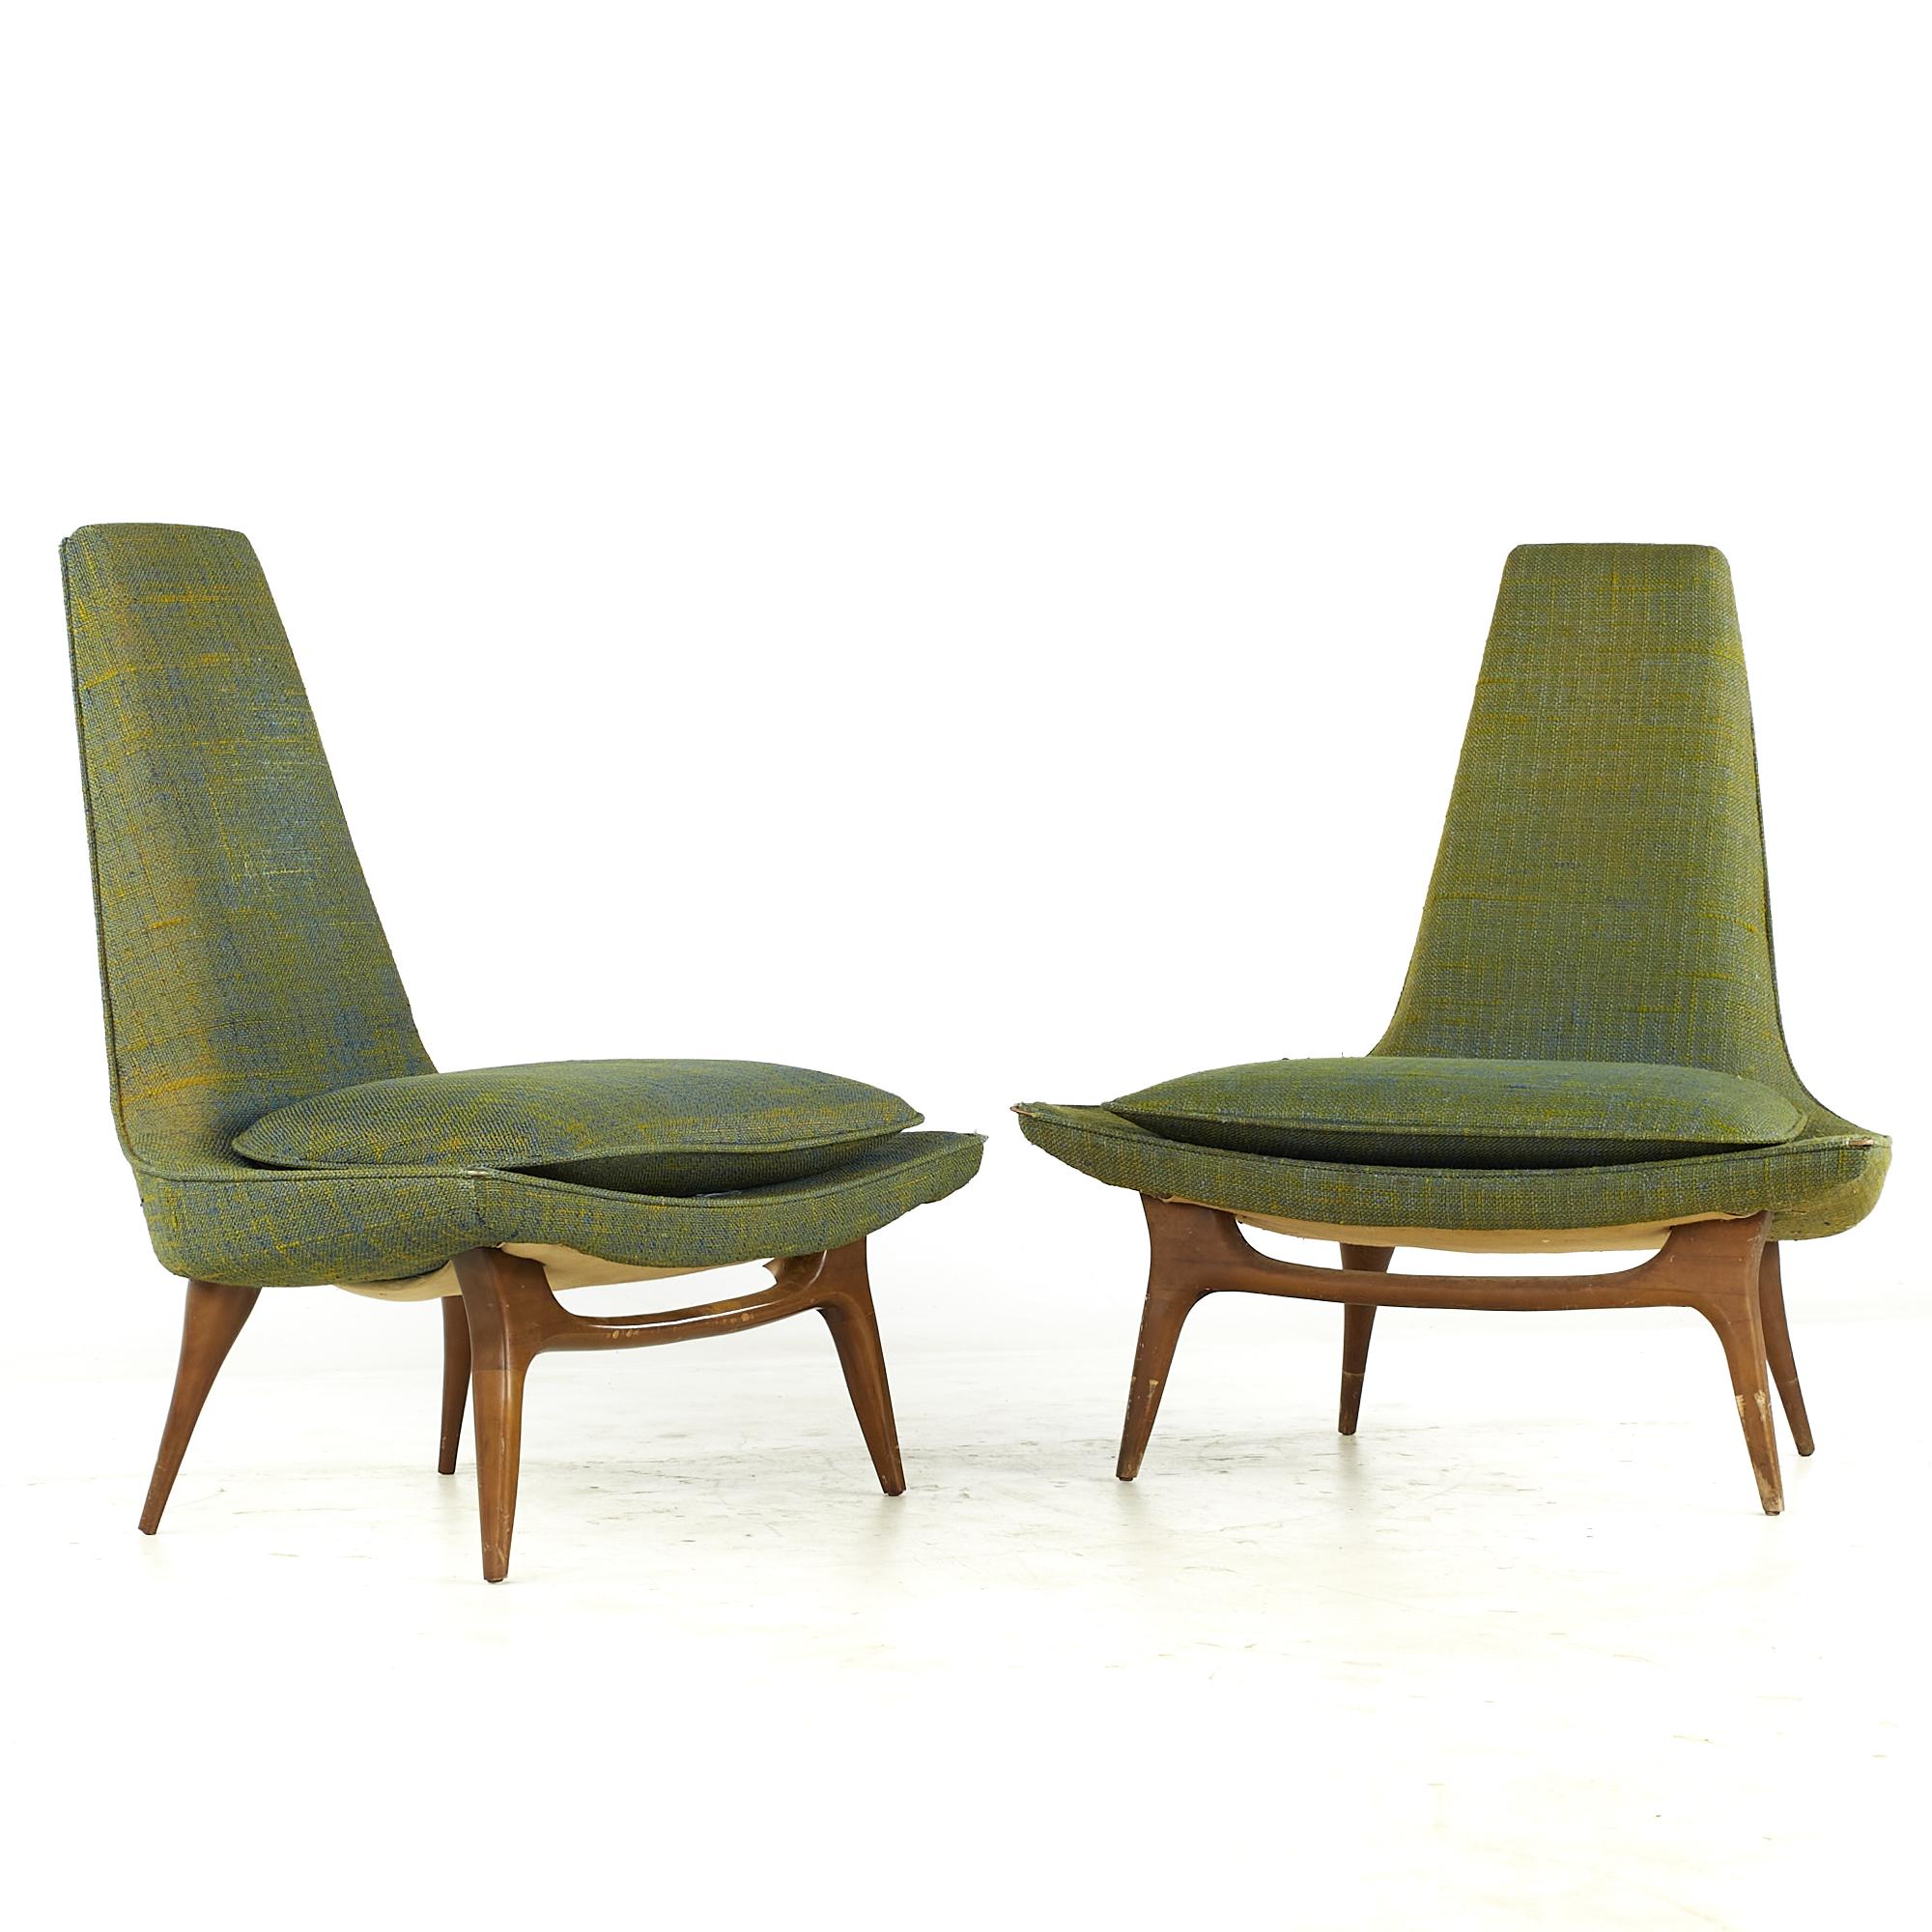 Karpen of California midcentury Slipper Chair – Pair

Each chair measures: 35.5 wide x 25 deep x 39 high, with a seat height of 18 inches

All pieces of furniture can be had in what we call restored vintage condition. That means the piece is